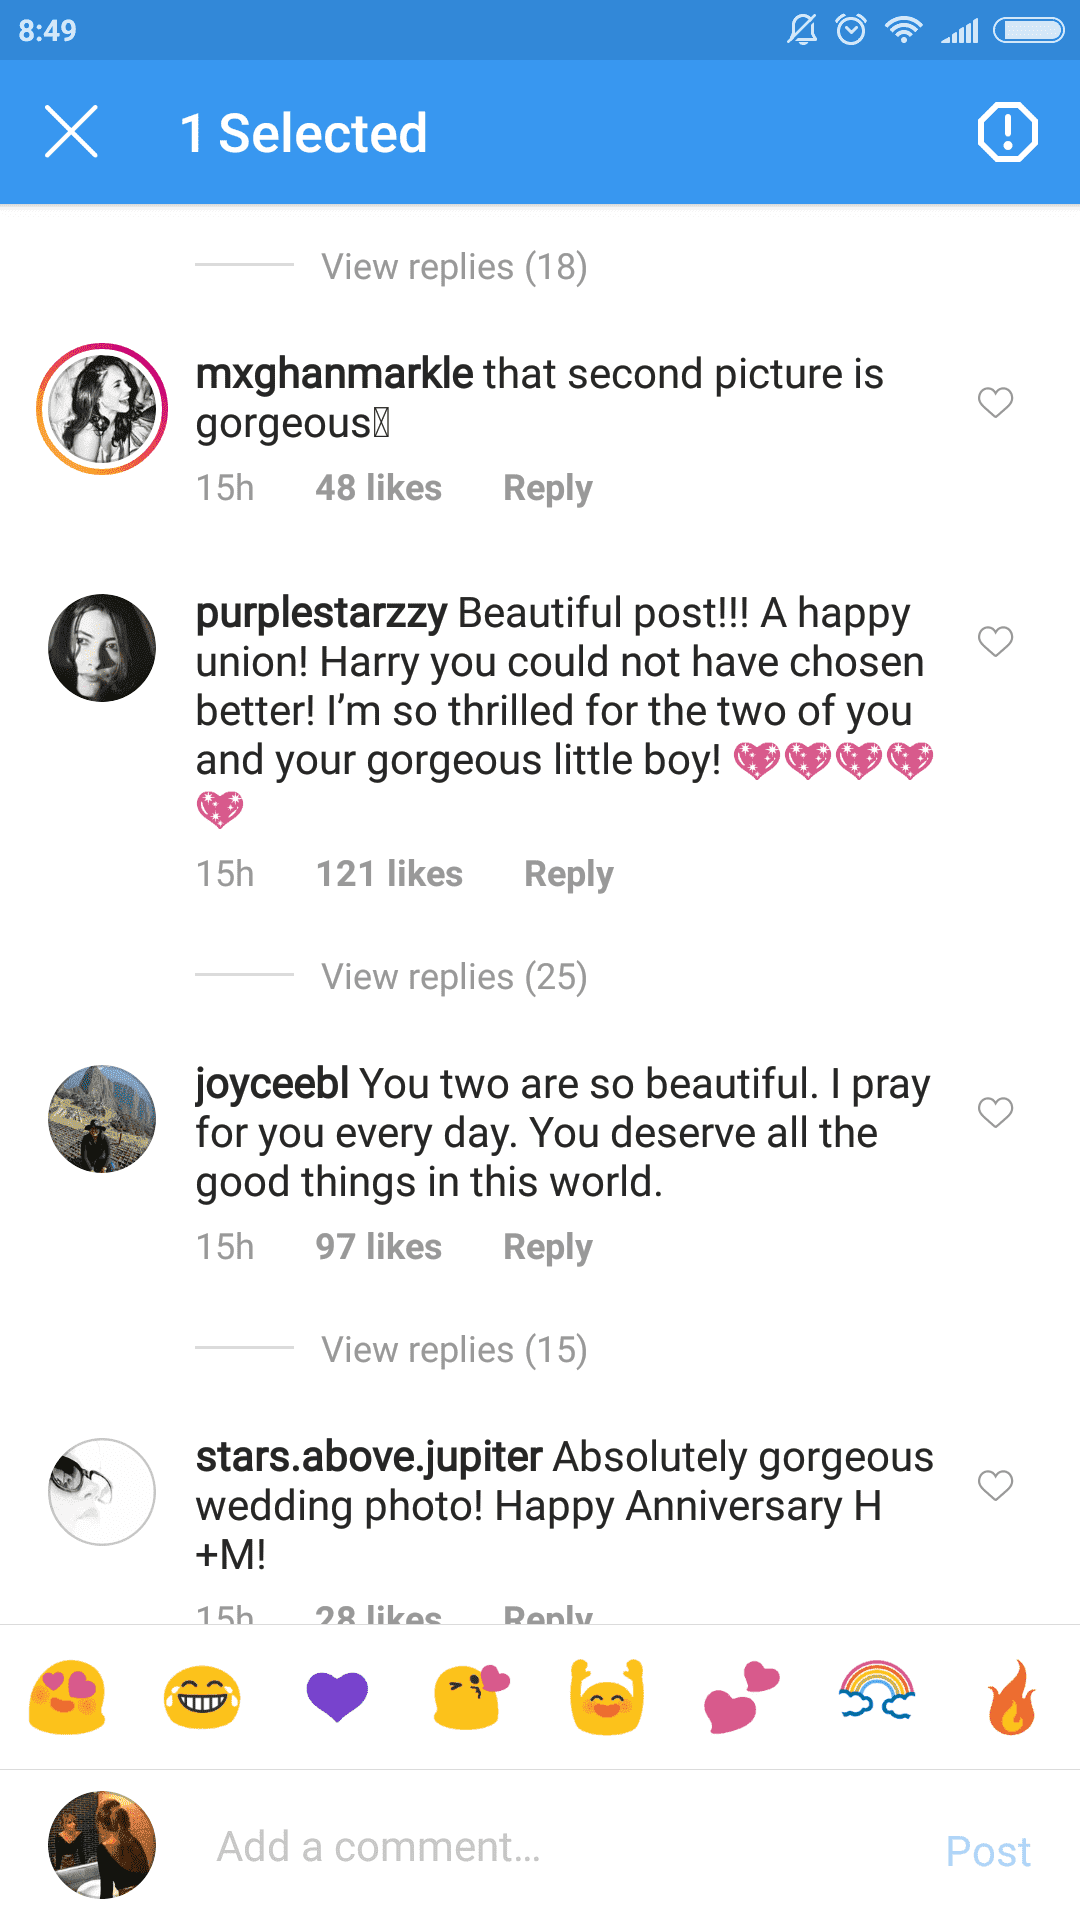 A screenshot of fans' comments on Prince Harry and Meghan's post. | Photo: Instagram.com/sussexroyal